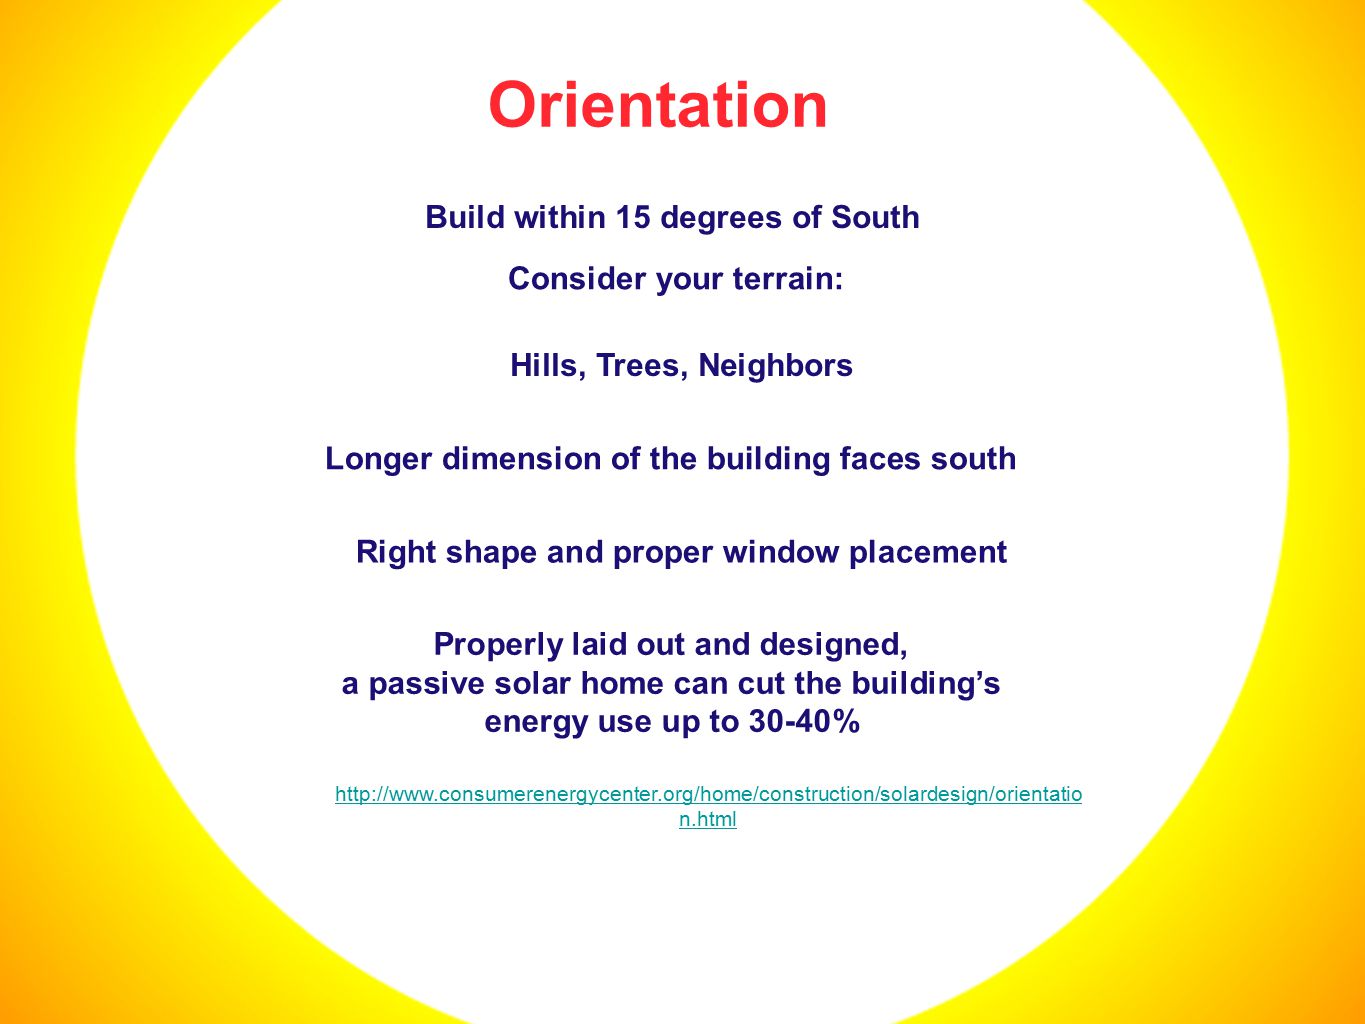 Orientation Build within 15 degrees of South Right shape and proper window placement Longer dimension of the building faces south Hills, Trees, Neighbors Consider your terrain: Properly laid out and designed, a passive solar home can cut the building’s energy use up to 30-40%   n.html